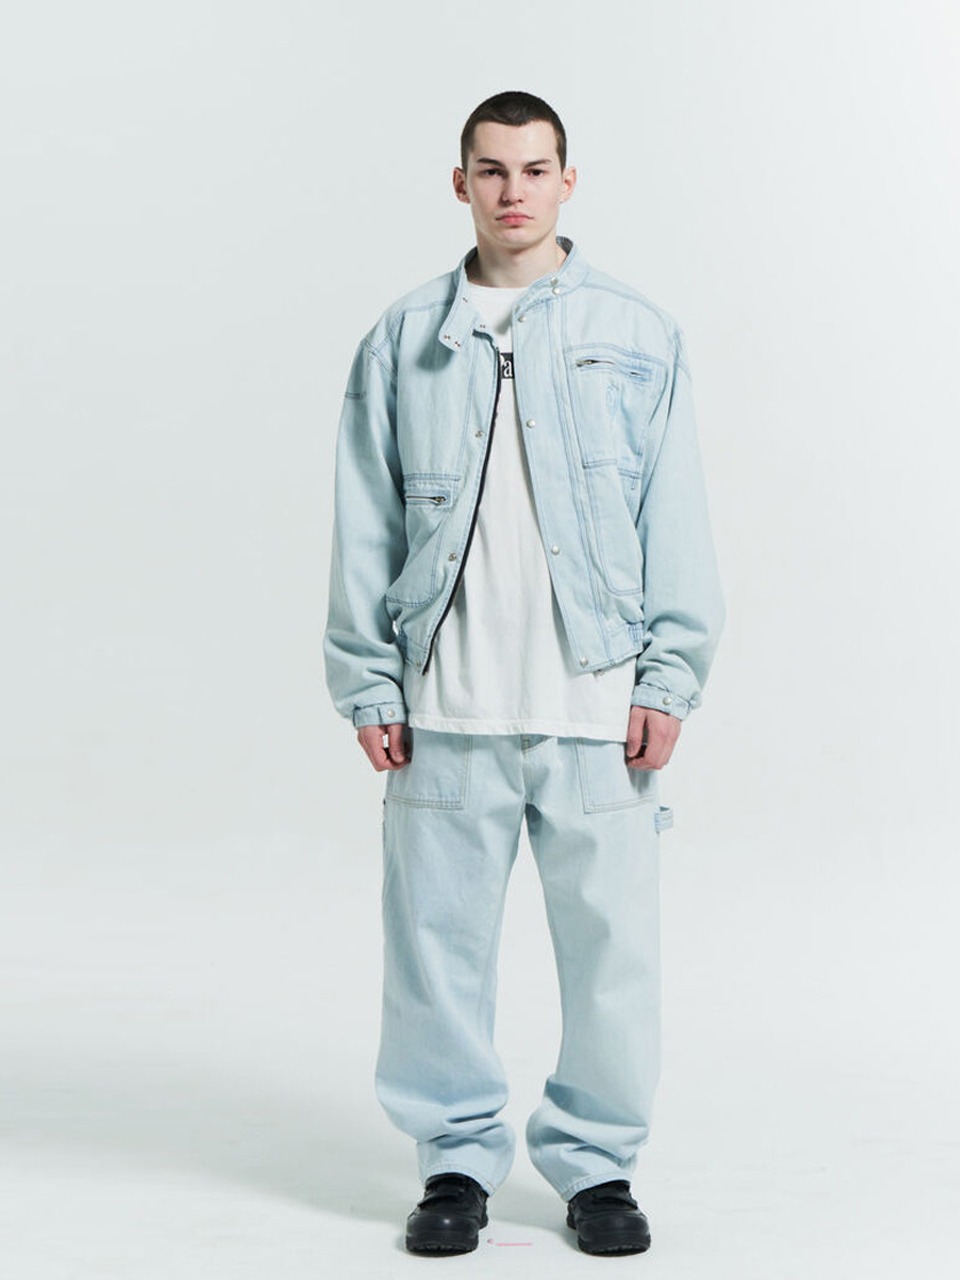 PLASTICPRODUCT - MPa MANAGER JACKET (LIGHT BLUE)